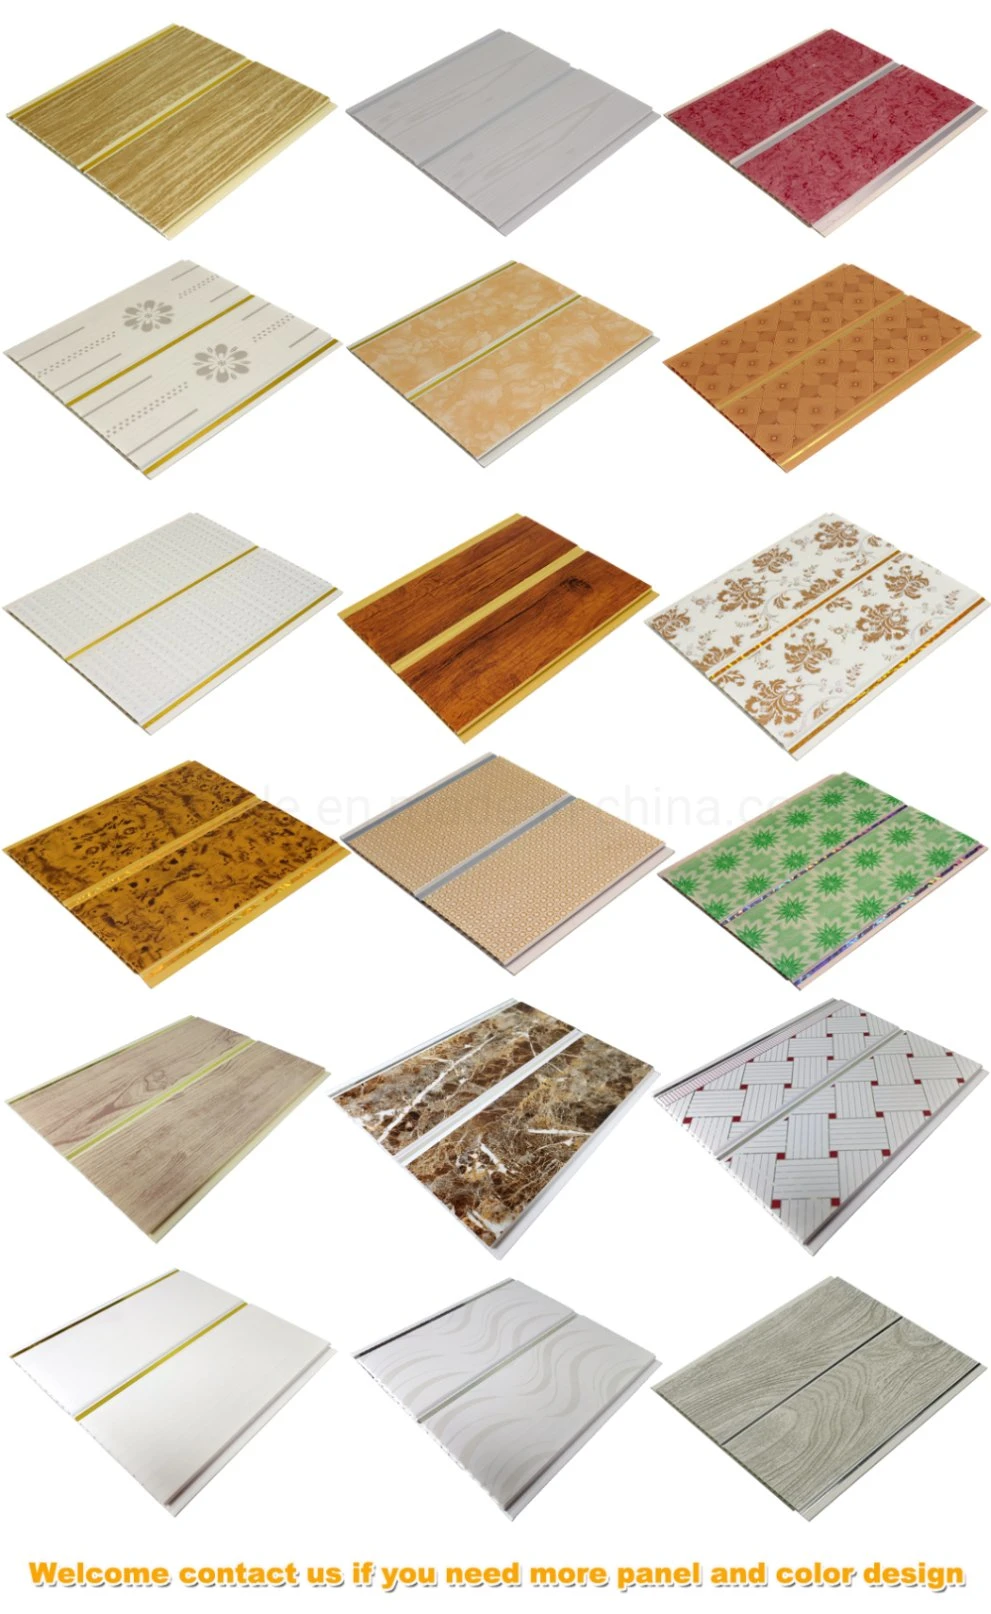 Easy Install PVC Ceiling Tile Decorative Wall Paneling Plastic Groove ceiling Panel